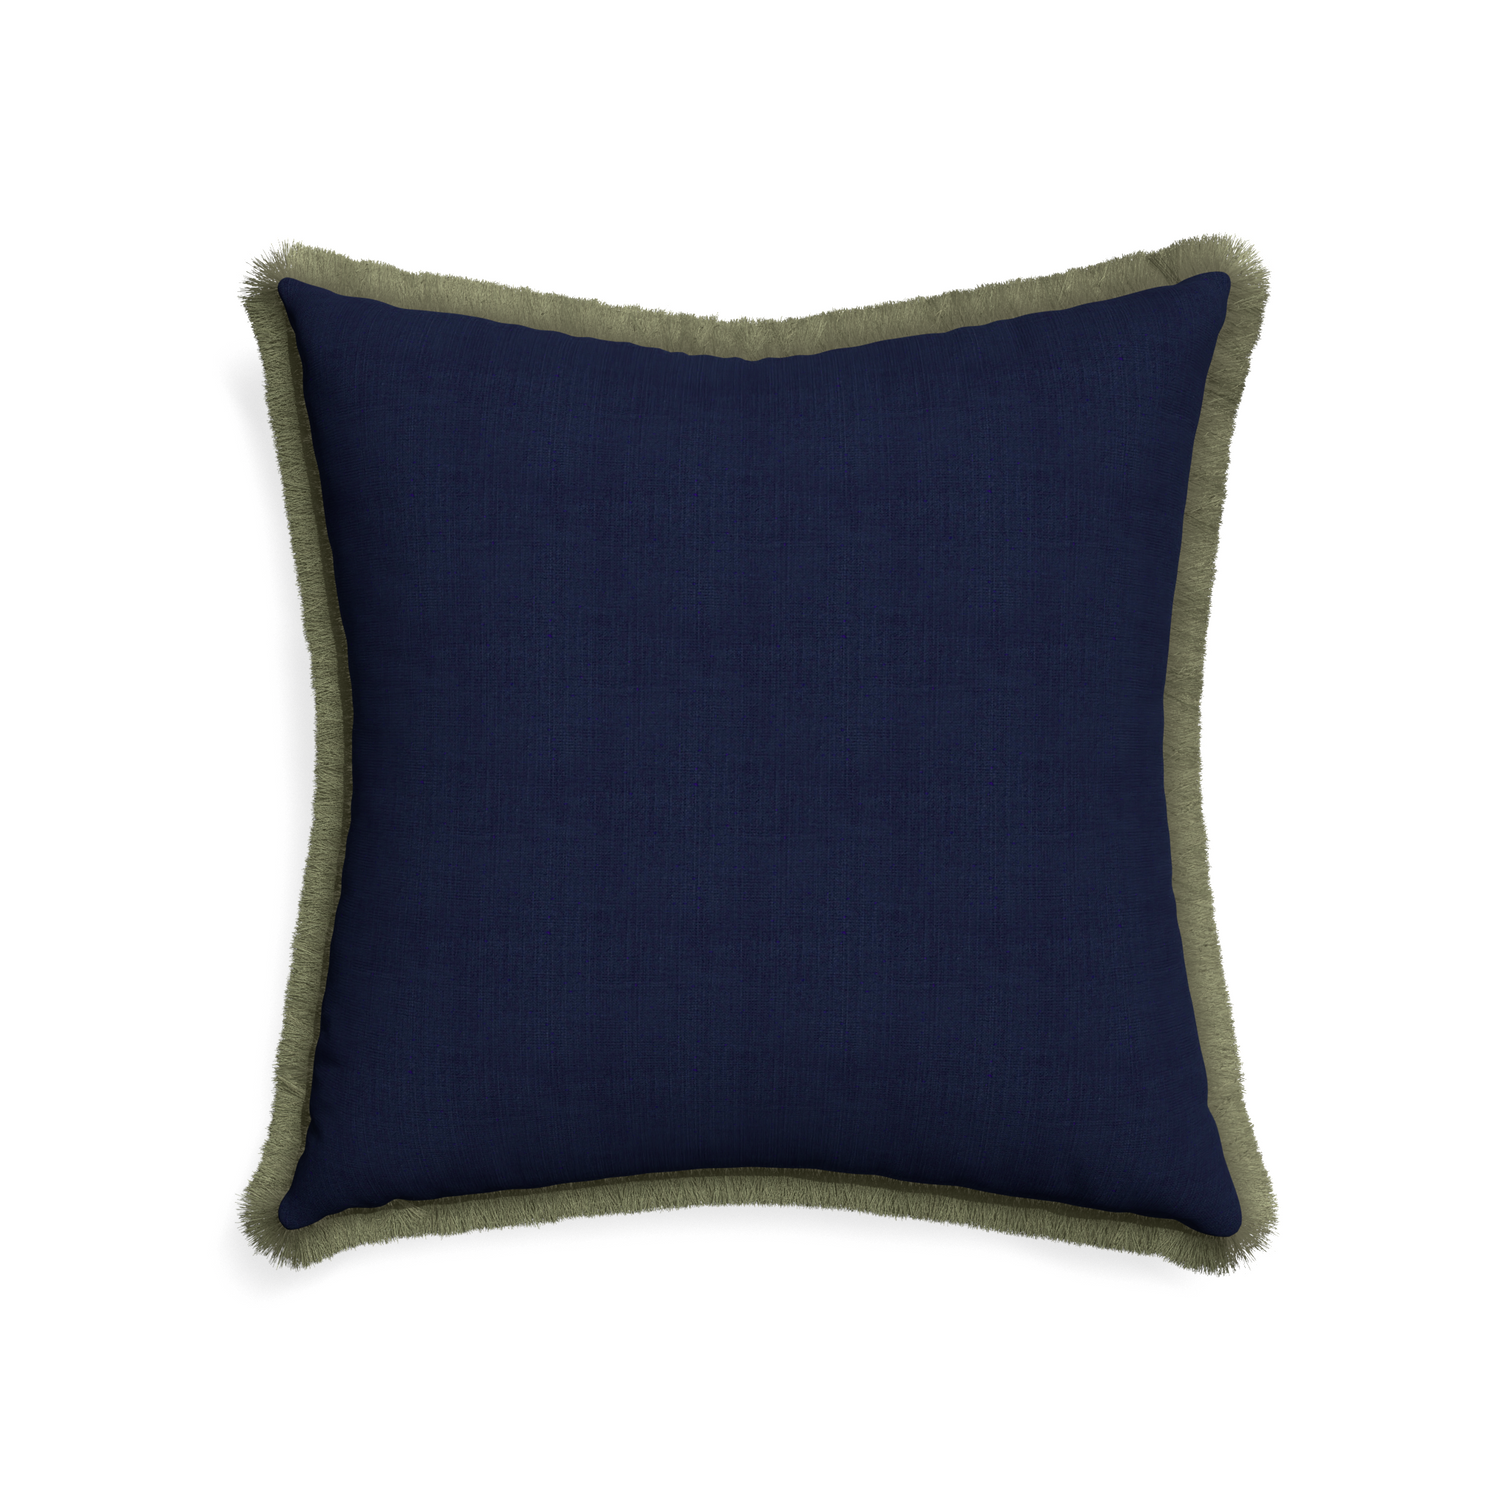 22-square midnight custom navy bluepillow with sage fringe on white background